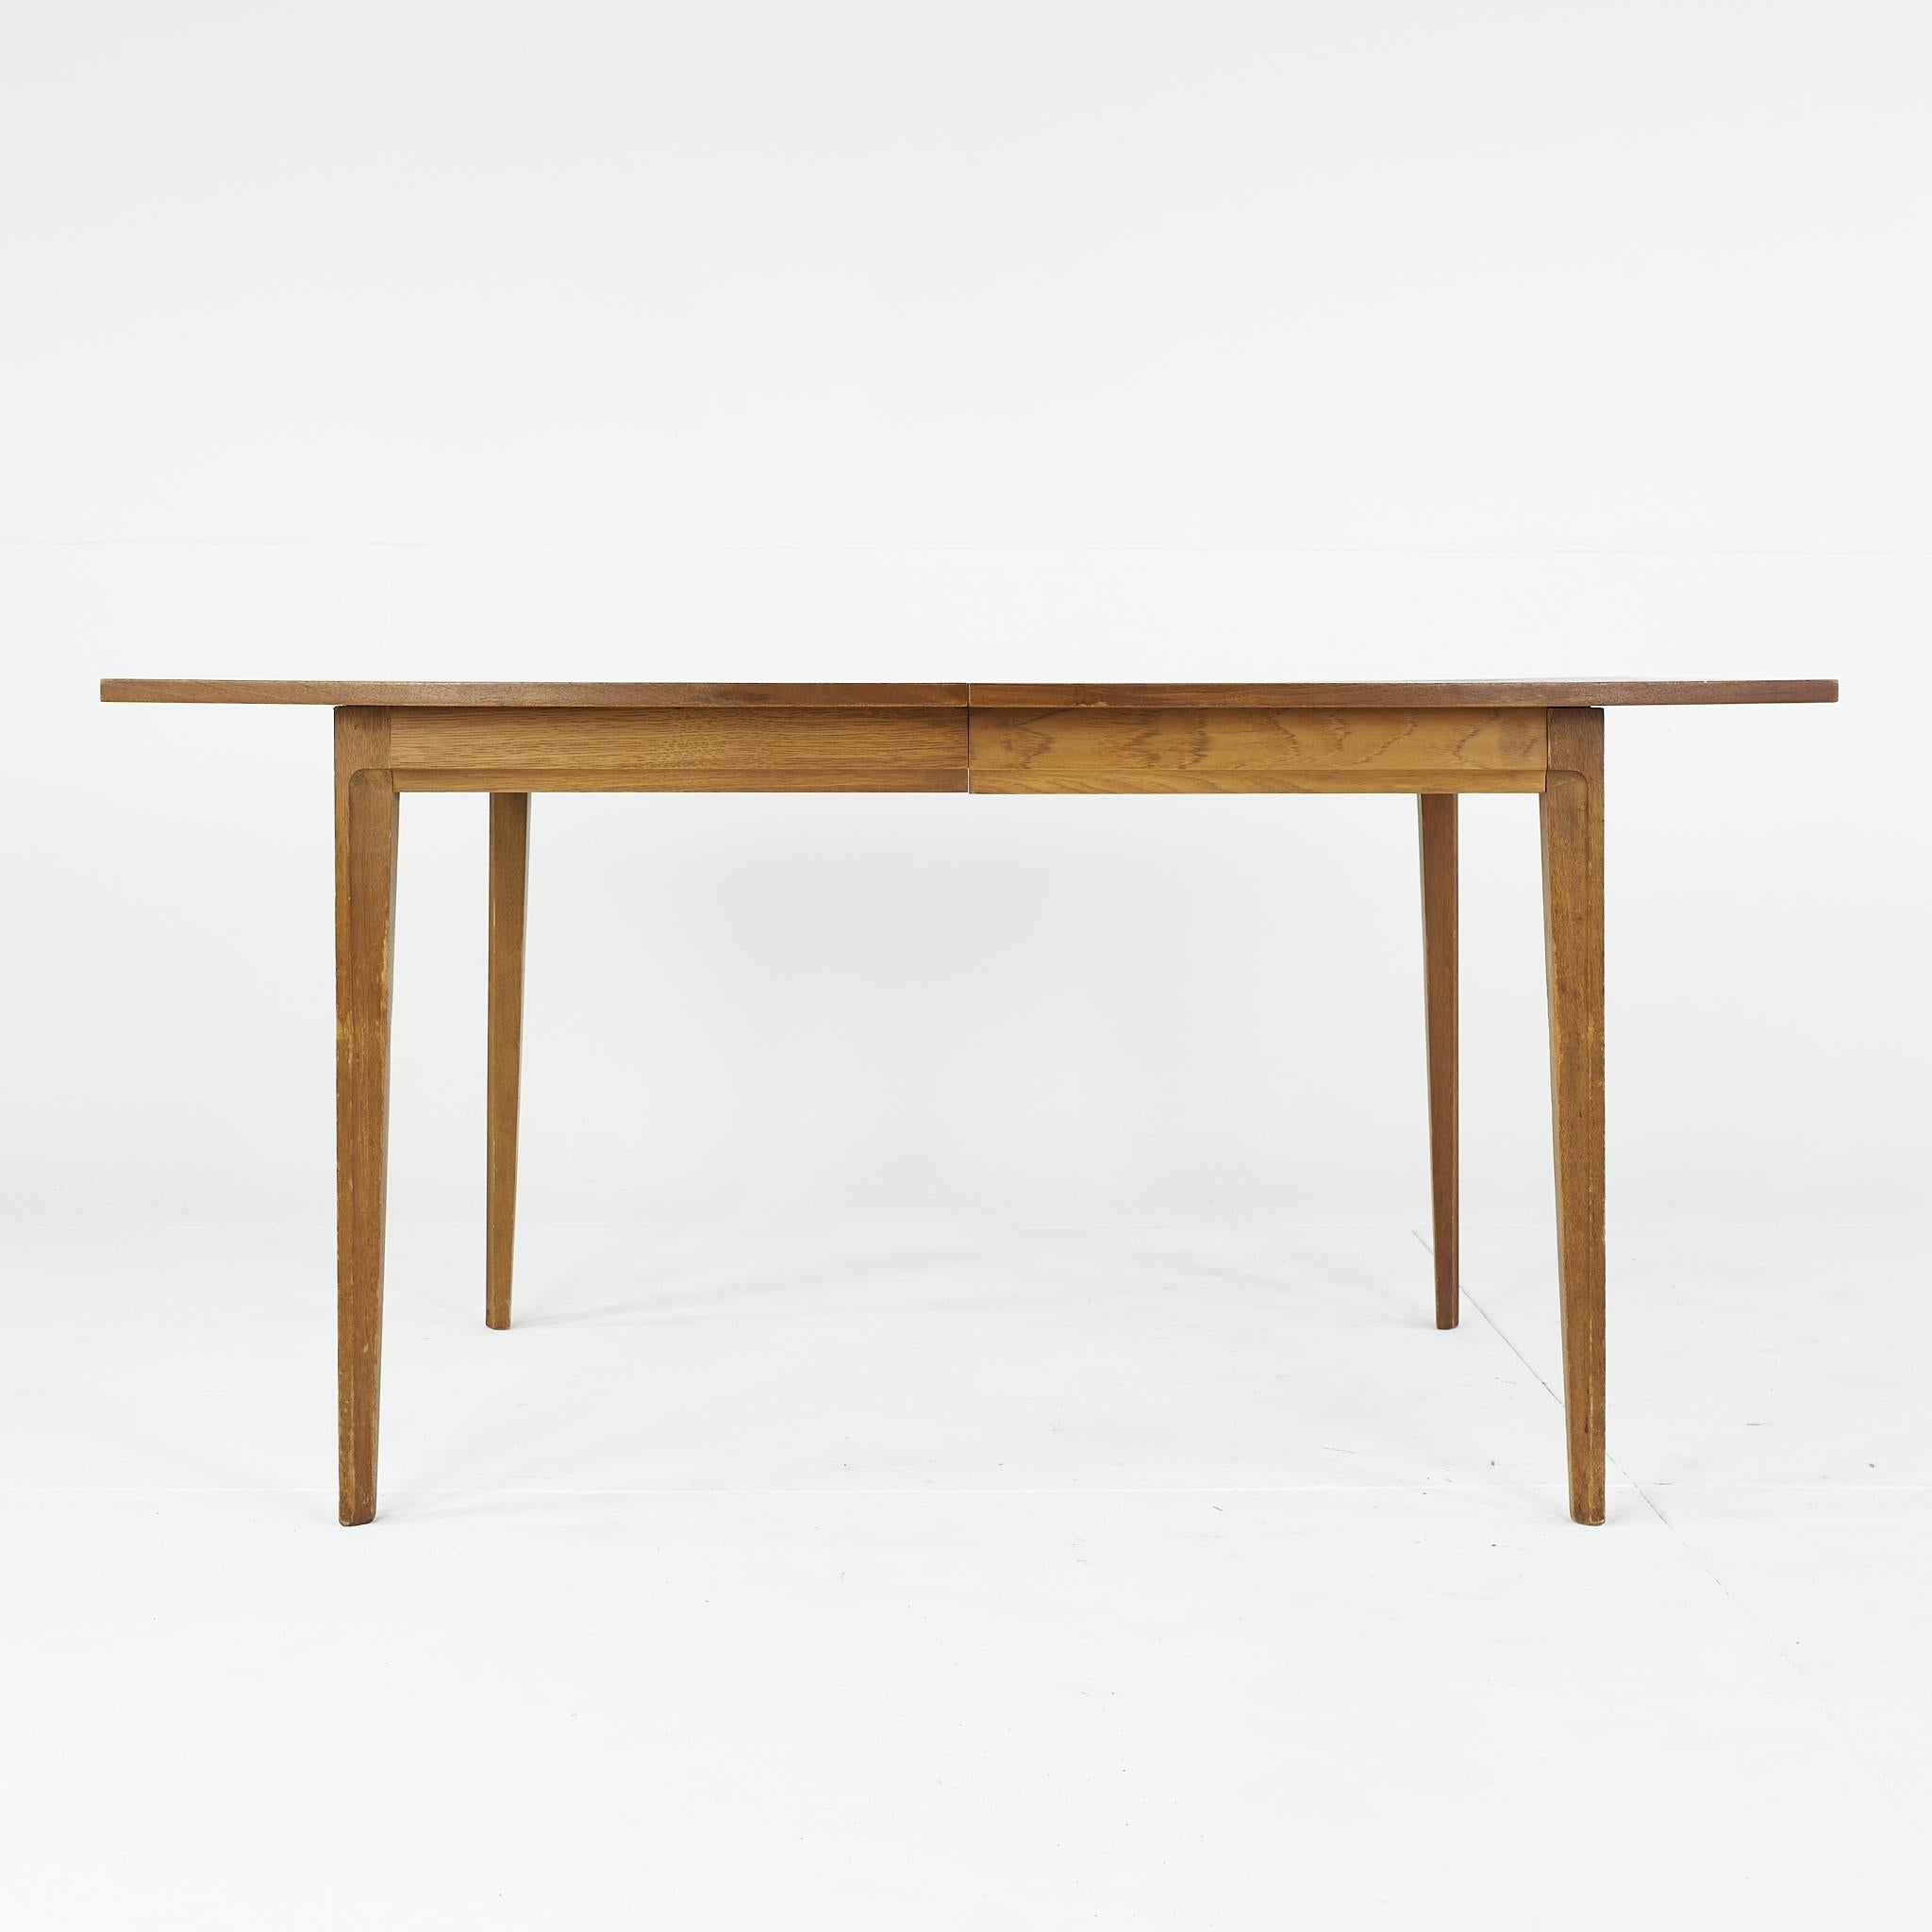 Broyhill forward 70 mid century walnut dining table with one leaf

This table measures: 60 wide x 40 deep x 30 inches high; with a chair clearance of 26 inches, the leaf measures 12 inches wide, making a maximum table width of 72 inches when the